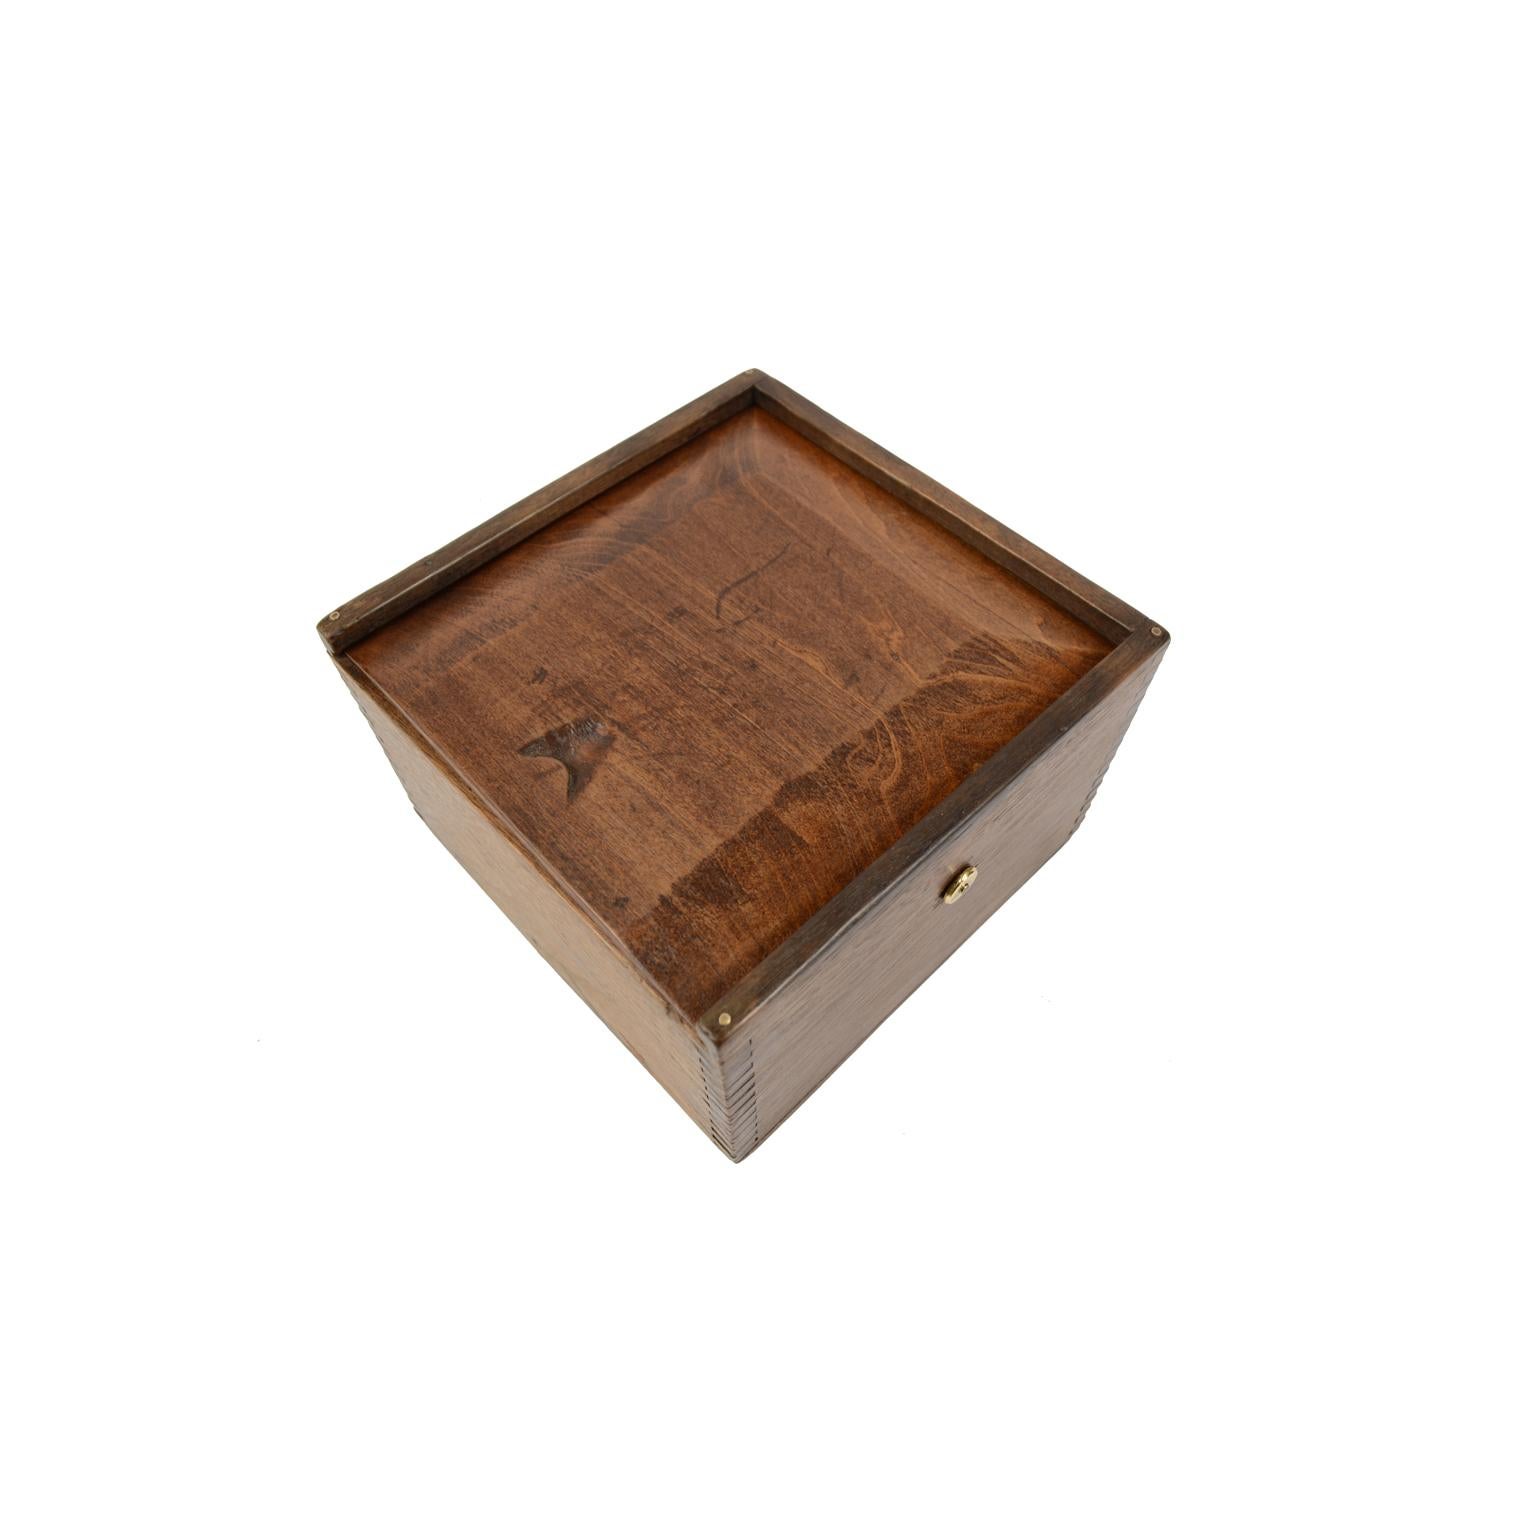 Compass Lilley & Reynolds Ltd London Made in 1930s in Its Original Wooden Box 1